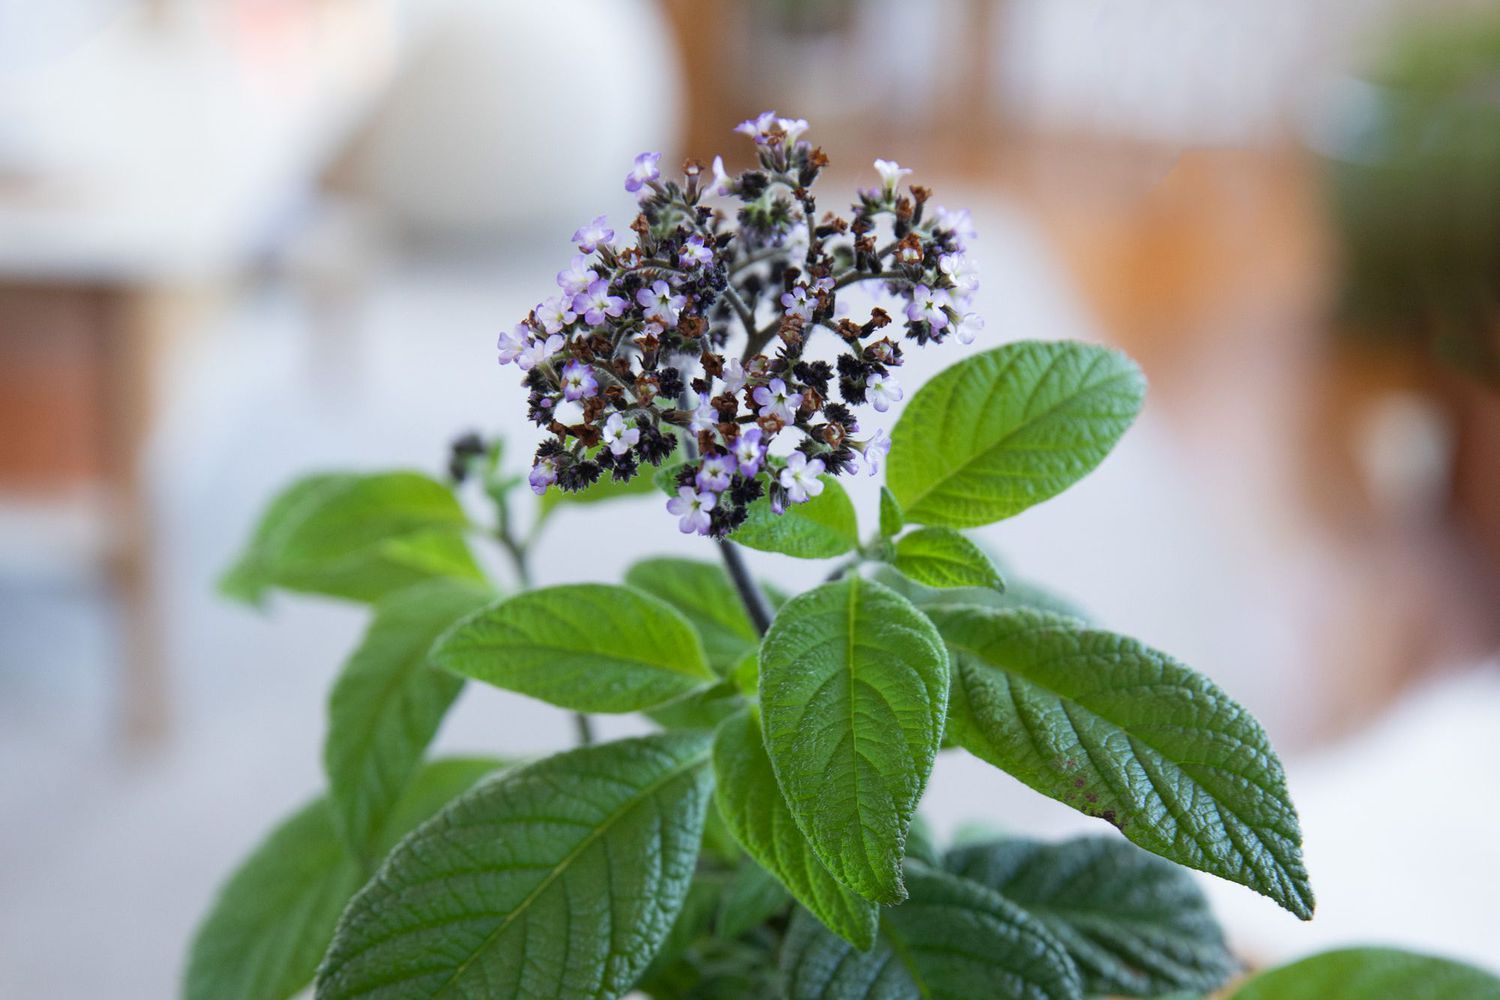 Heliotrope plant with light purple and dark purple flower clusters on top of leaves